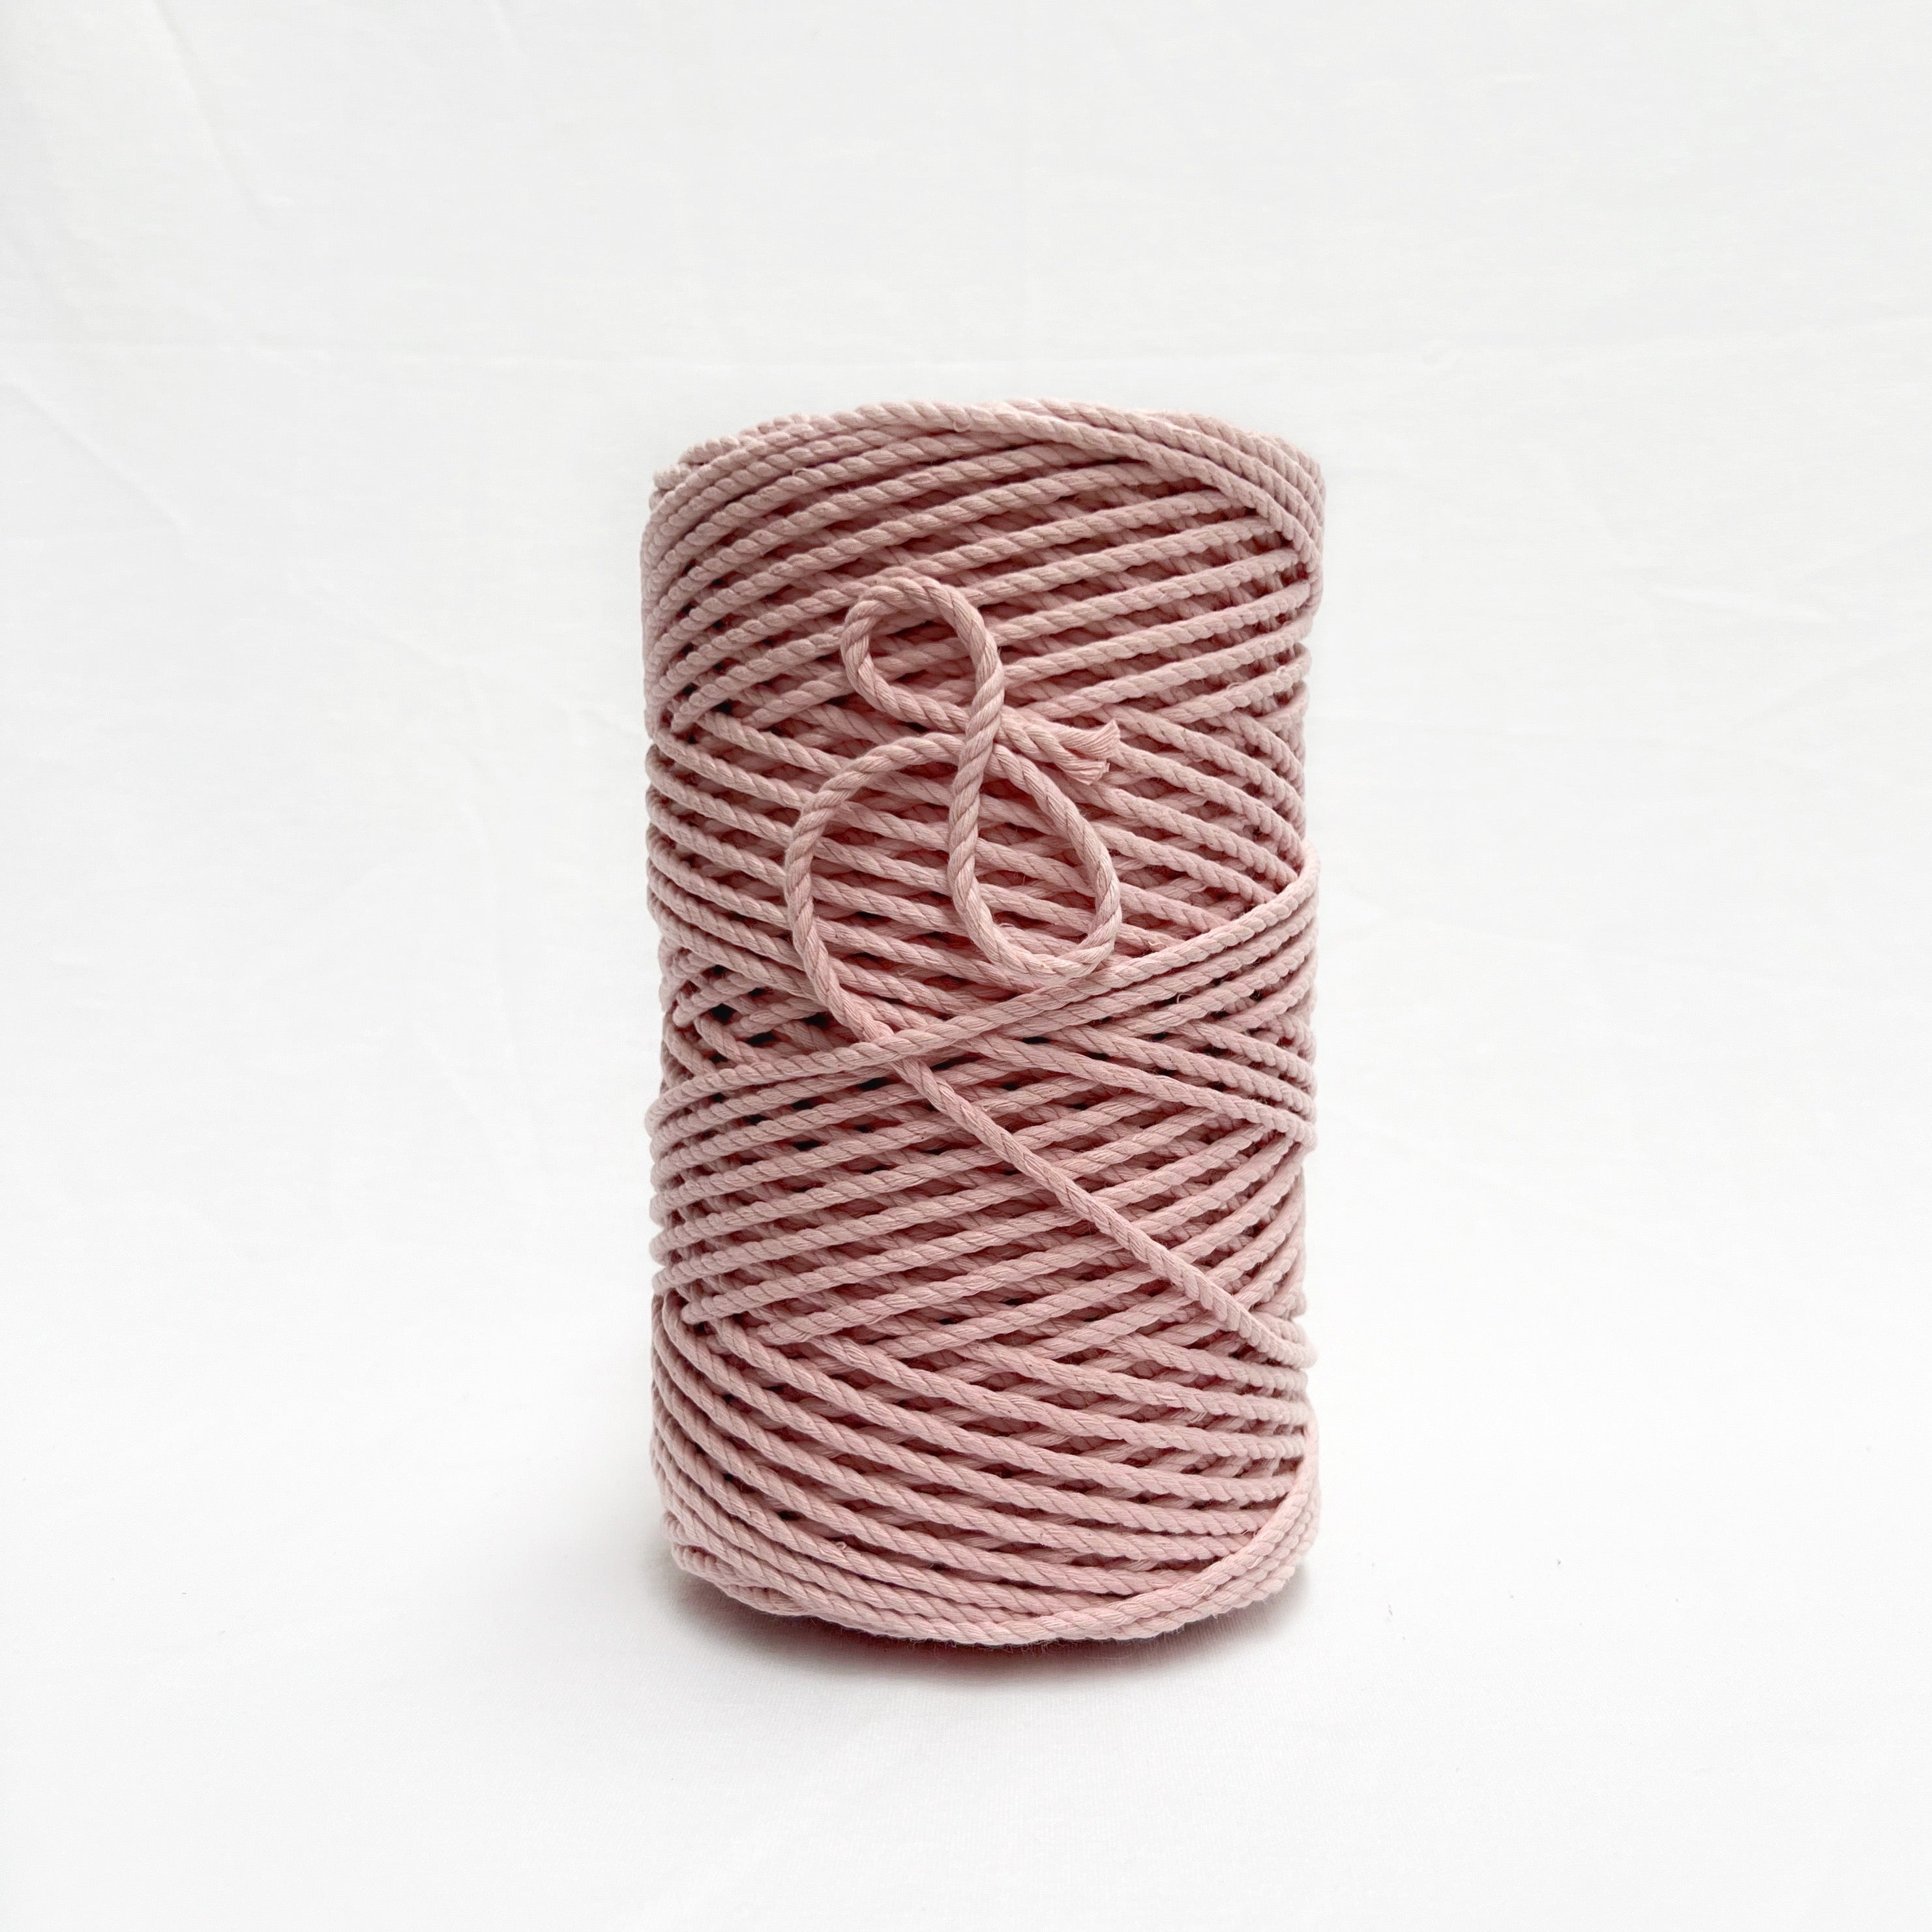 Recycled Luxe Macrame String // Powder Pink - Mary Maker Studio - Macrame &  Weaving Supplies and Education.